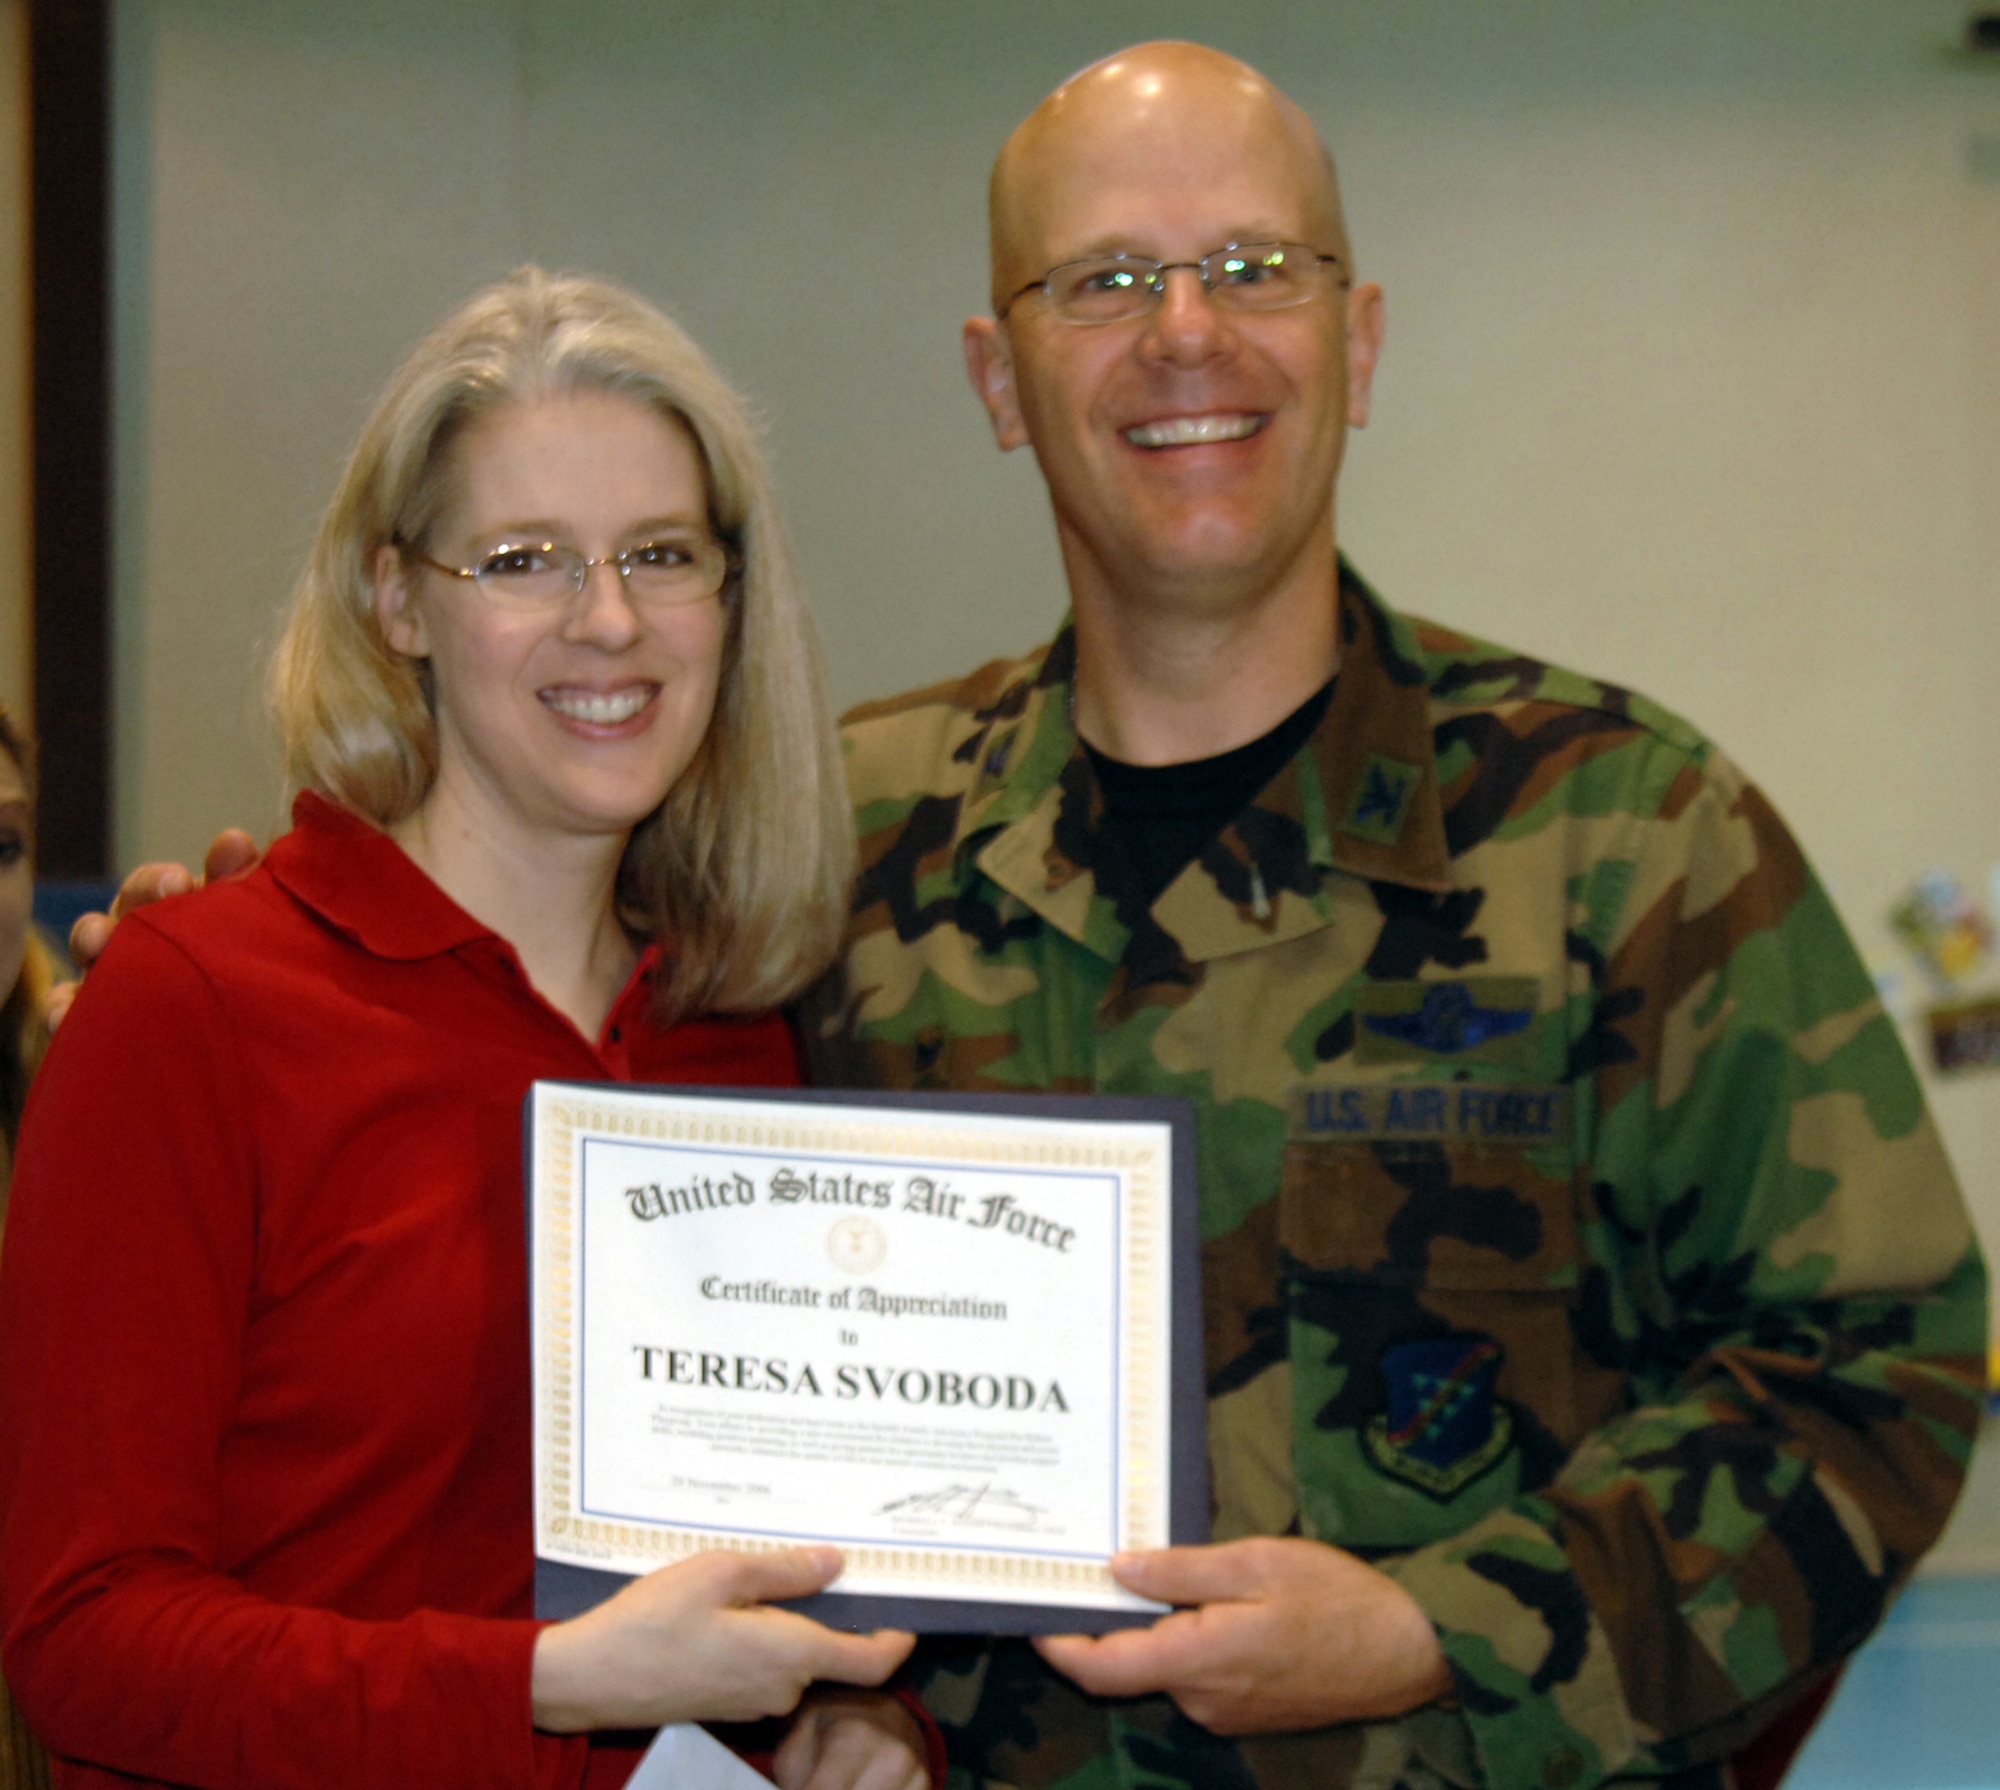 Col. Murrell "Tip" Stinnette, (right) 39th Air Base Wing commander, presents a Certificate of Appreciation to Teresa Svoboda for her outstanding volunteer work at the Youth Center, Nov. 28. (U.S. Air Force photo by Airman Kelly L. LeGuillon) 